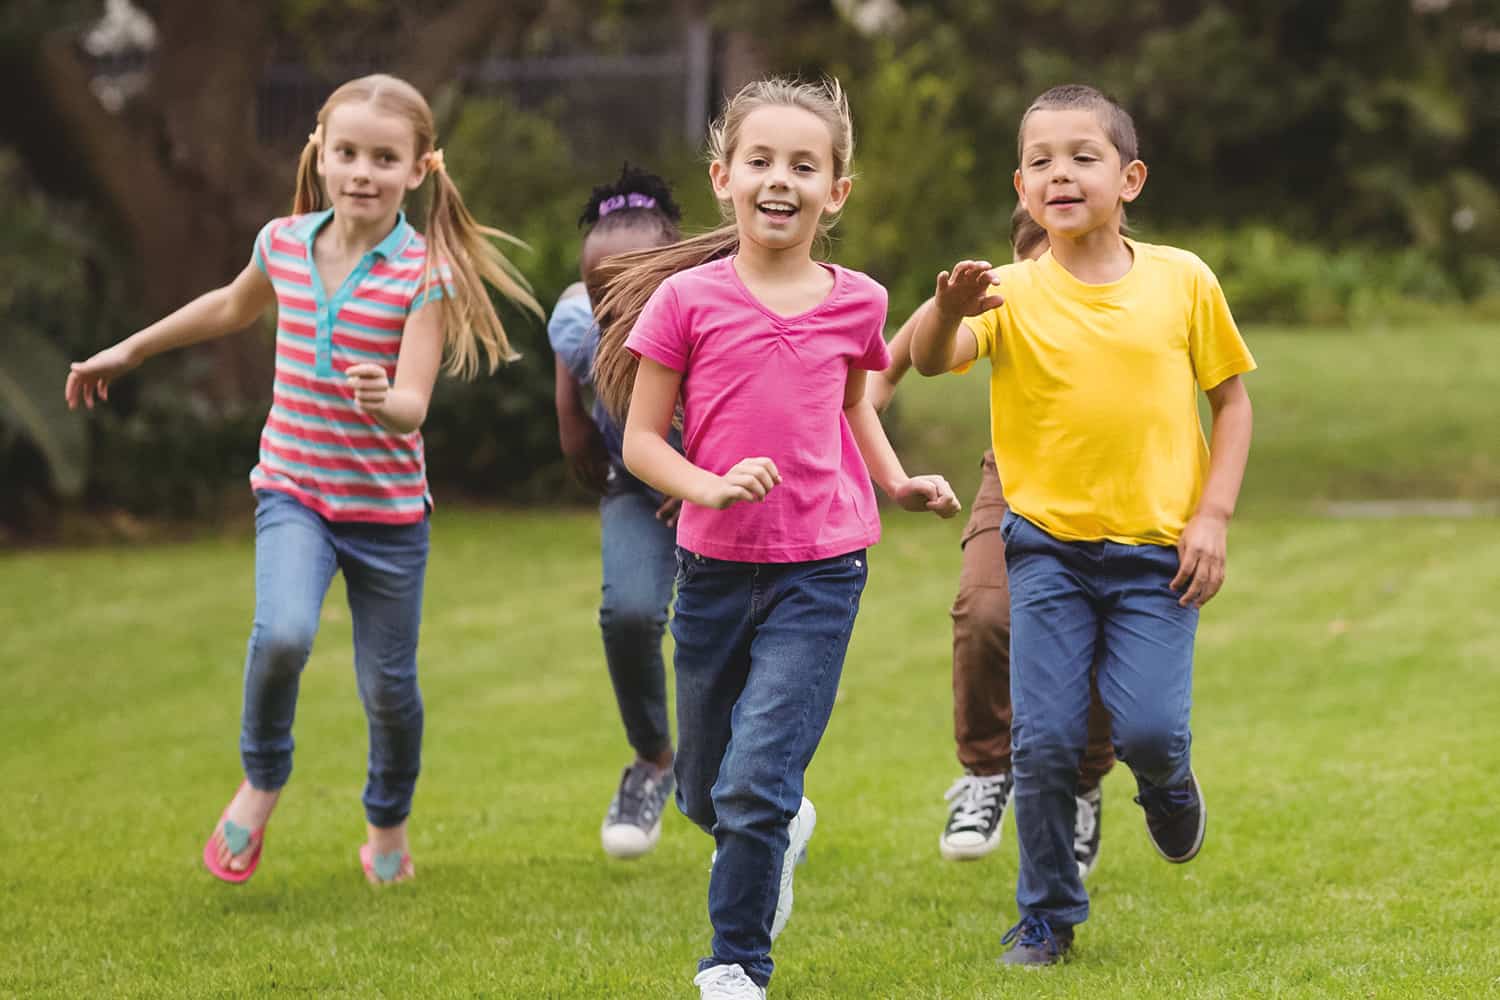 A group of young children running on a grassy area.